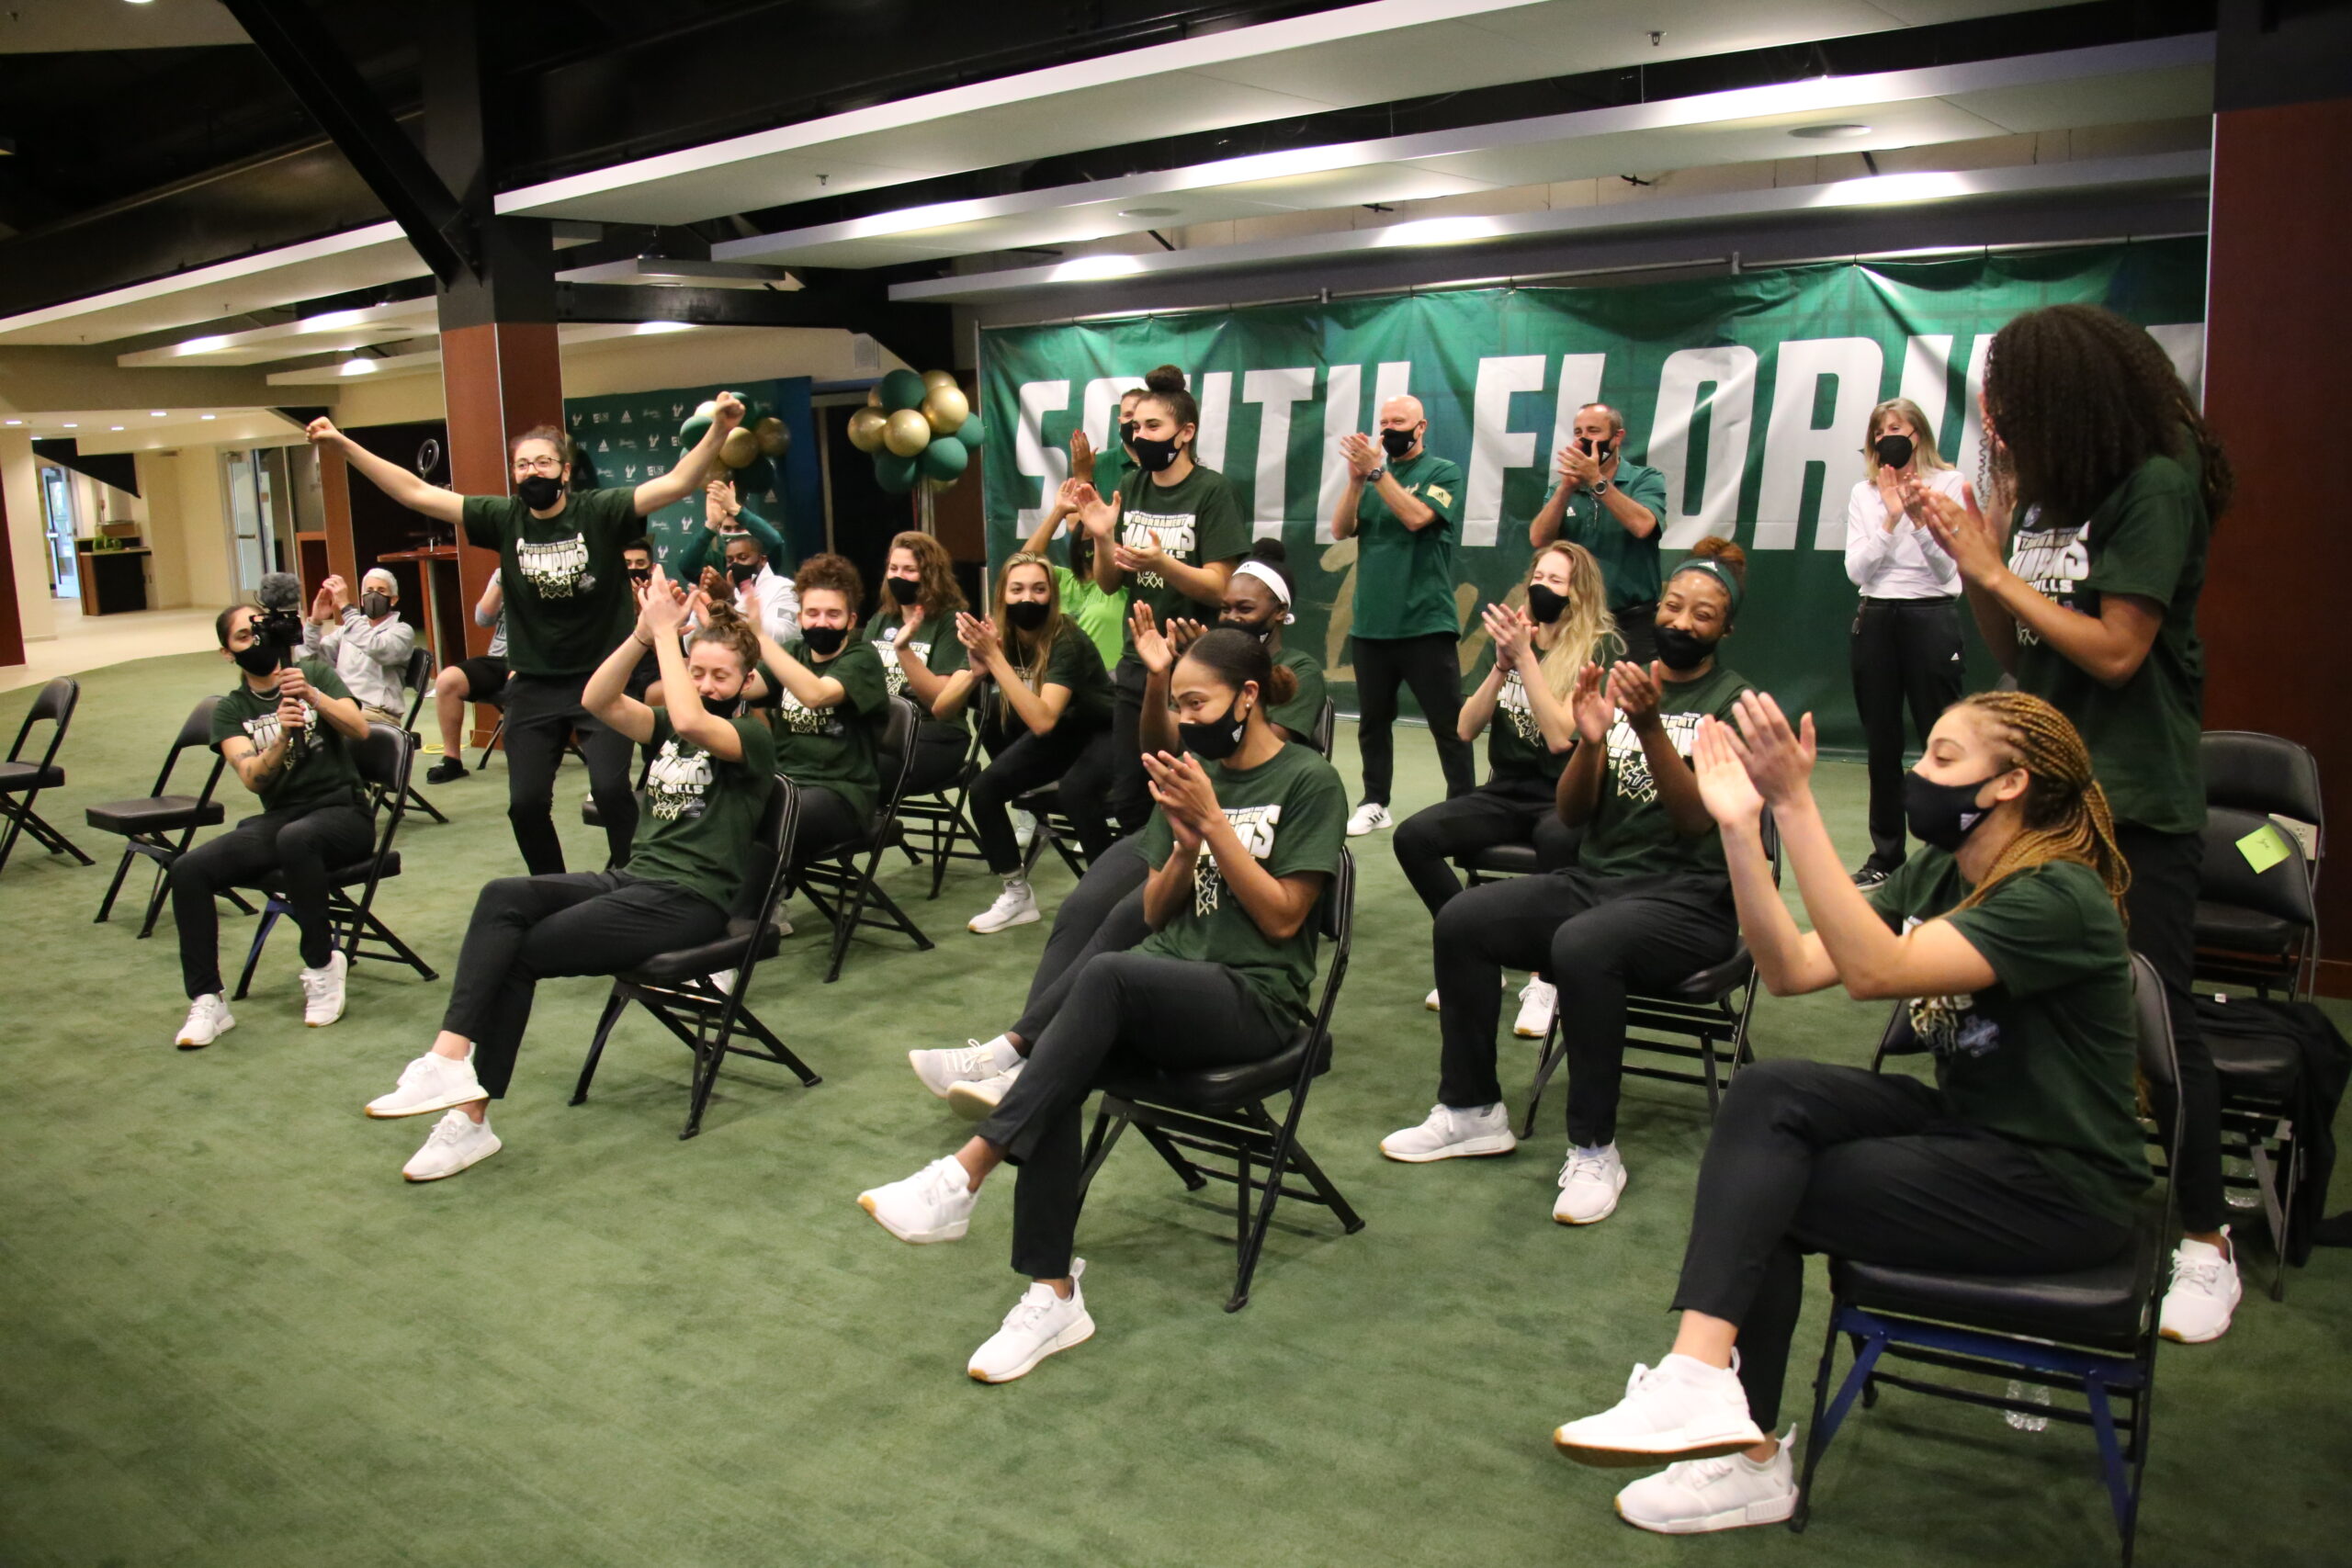 Bulls seeded No. 8 in NCAA tournament, set to play No. 9 Washington State in first round